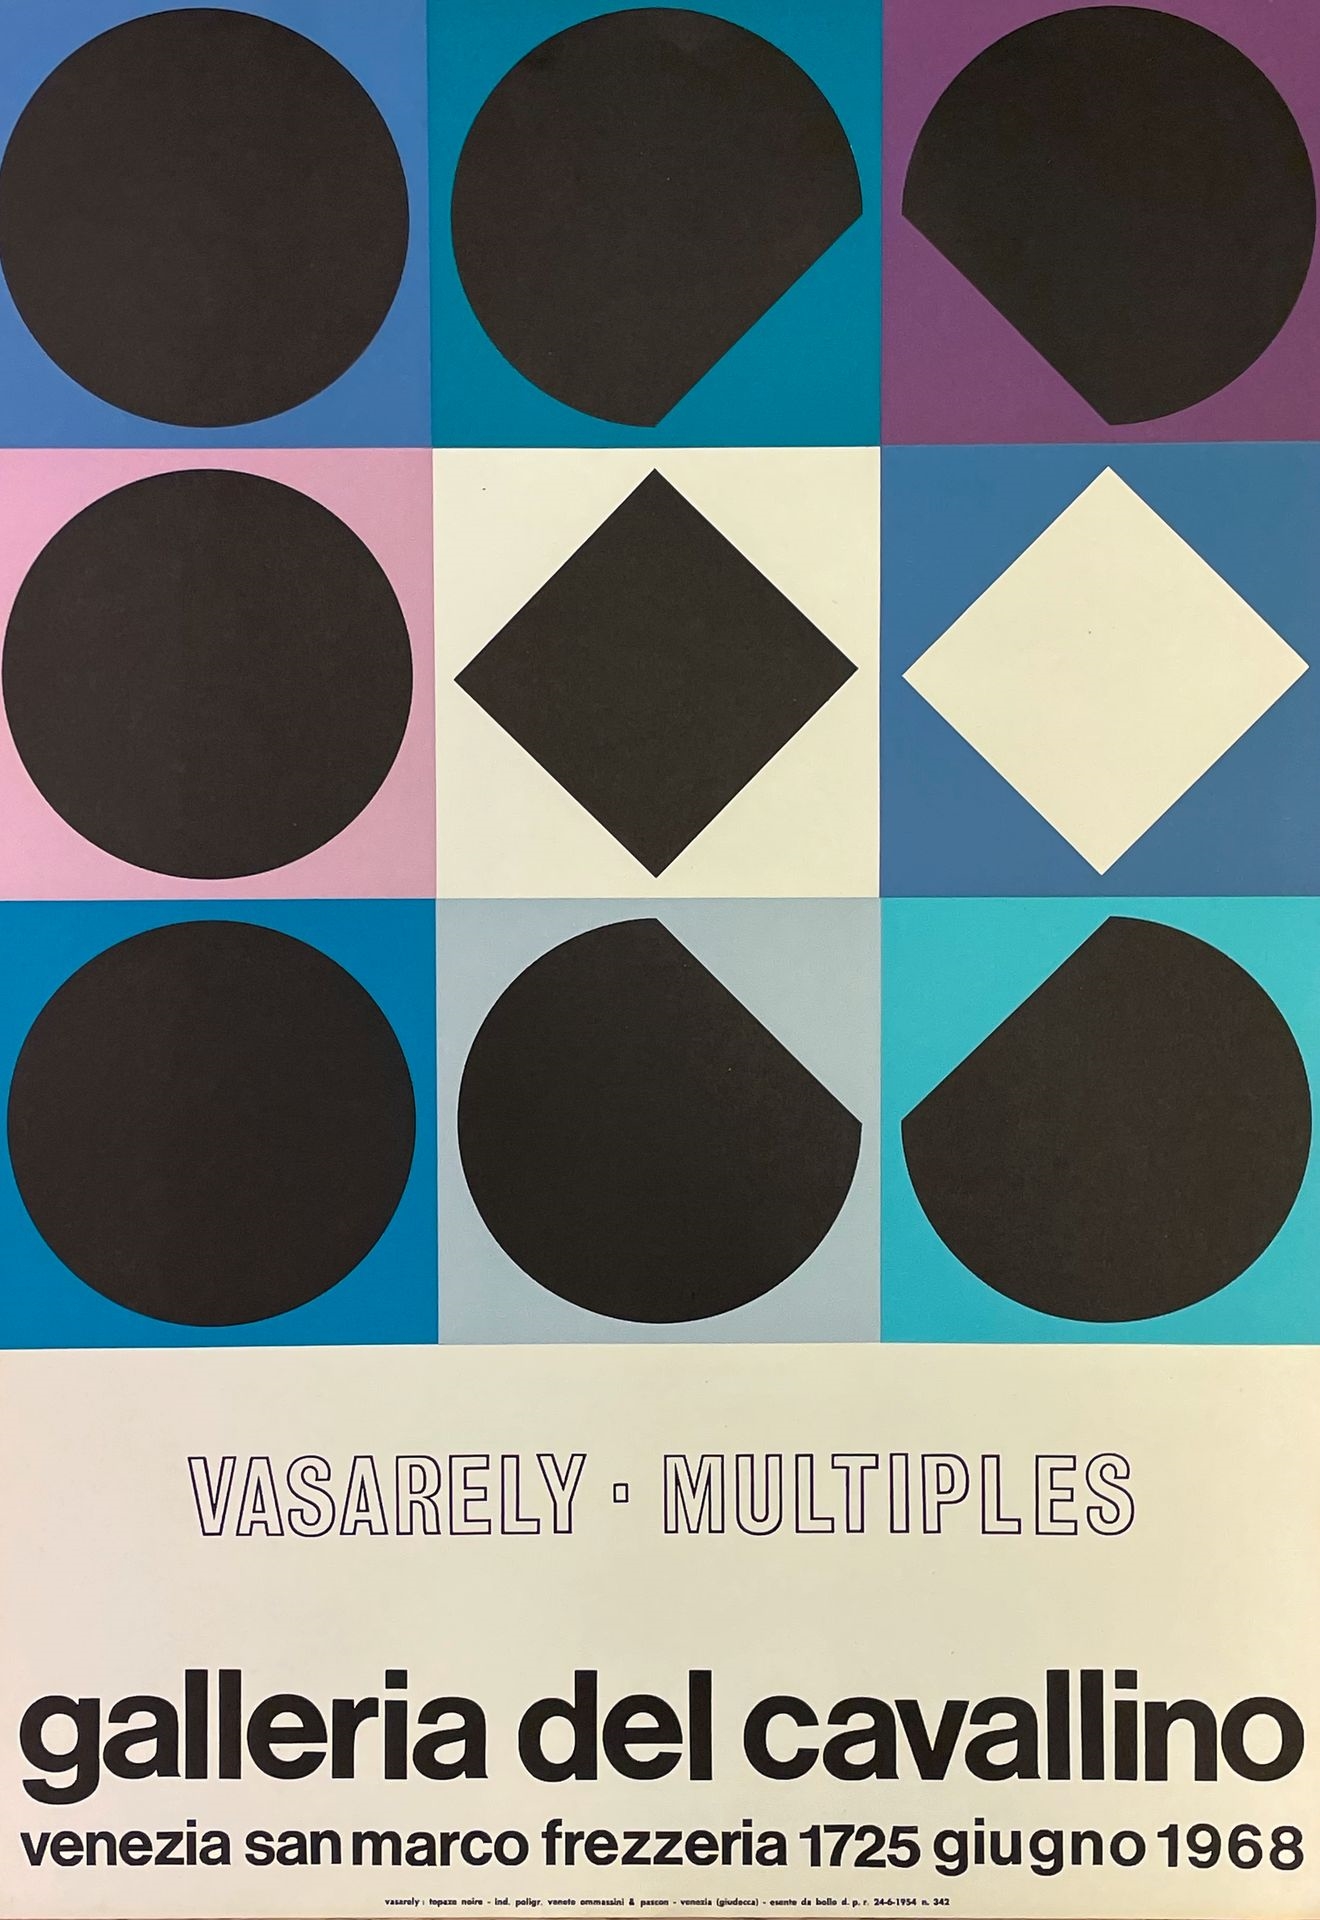 Poster by Victor Vasarely, 1968